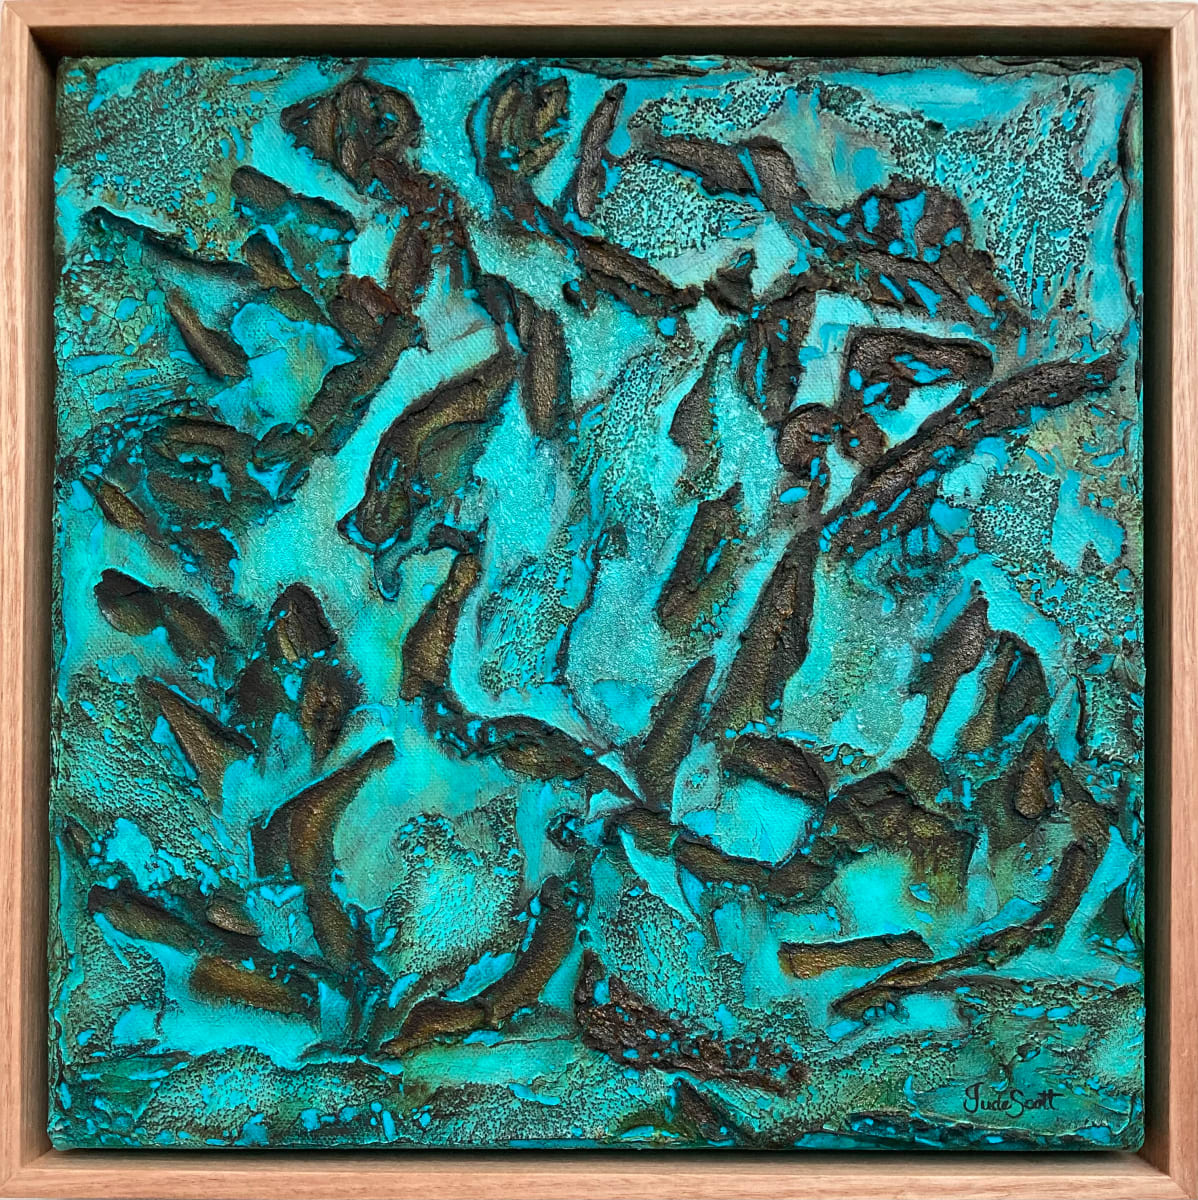 Opal by Jude Scott  Image:  I always gravitate to coastal colours of turquoise, aqua & blues of the water & browns, reds, tans & even white to grey found in sandstone rocks around beaches.  When I finished this piece it reminded me of the colours seen in opals so the title was easy....'Opal'. 